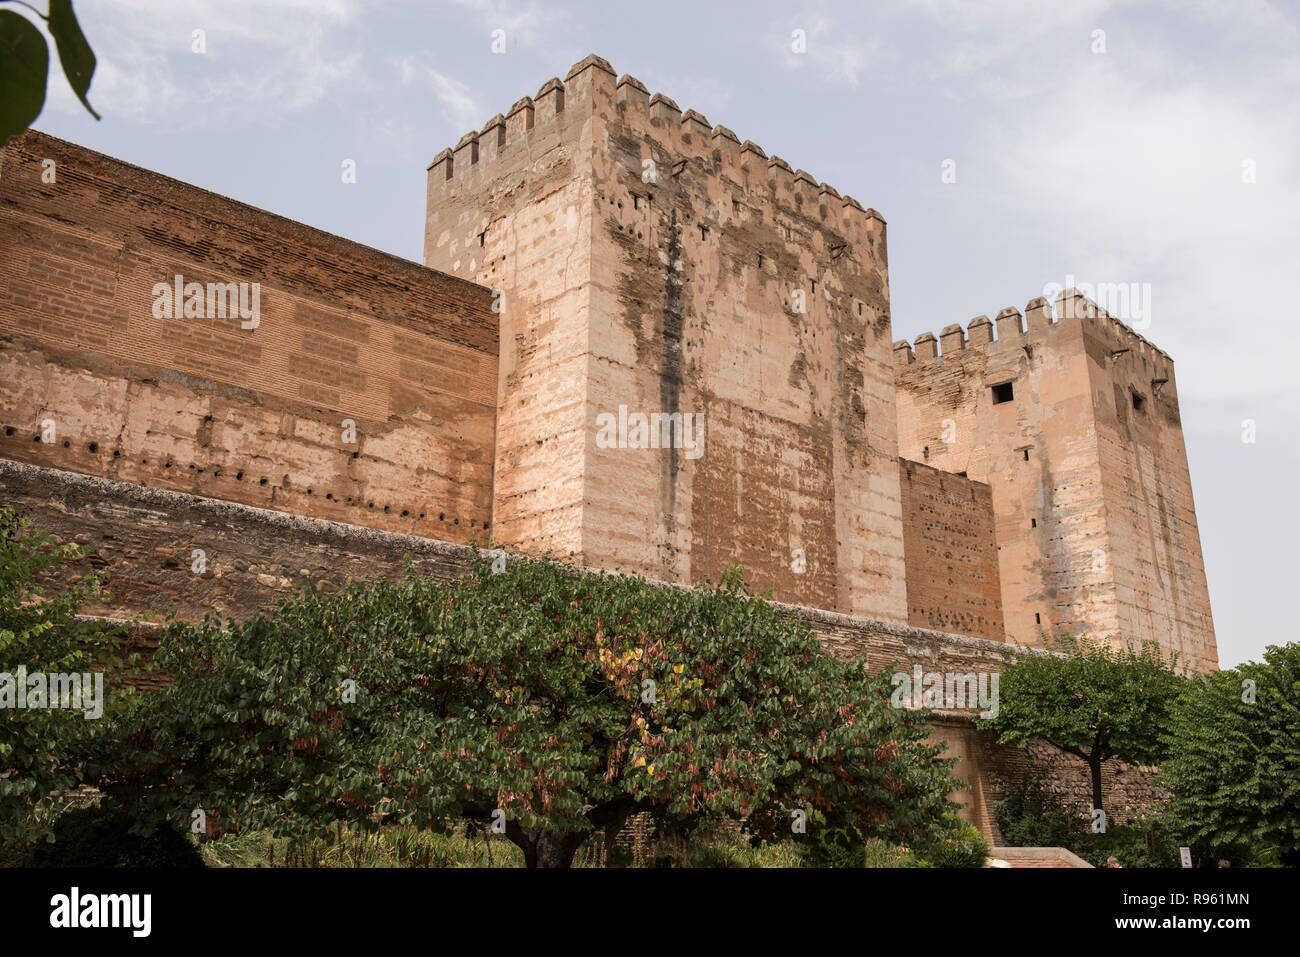 Architecture of the famous Alhambra Palace in Granada, Andulasia, Spain. The palace is a famous Islamic historical palace with spectacular architectur Stock Photo